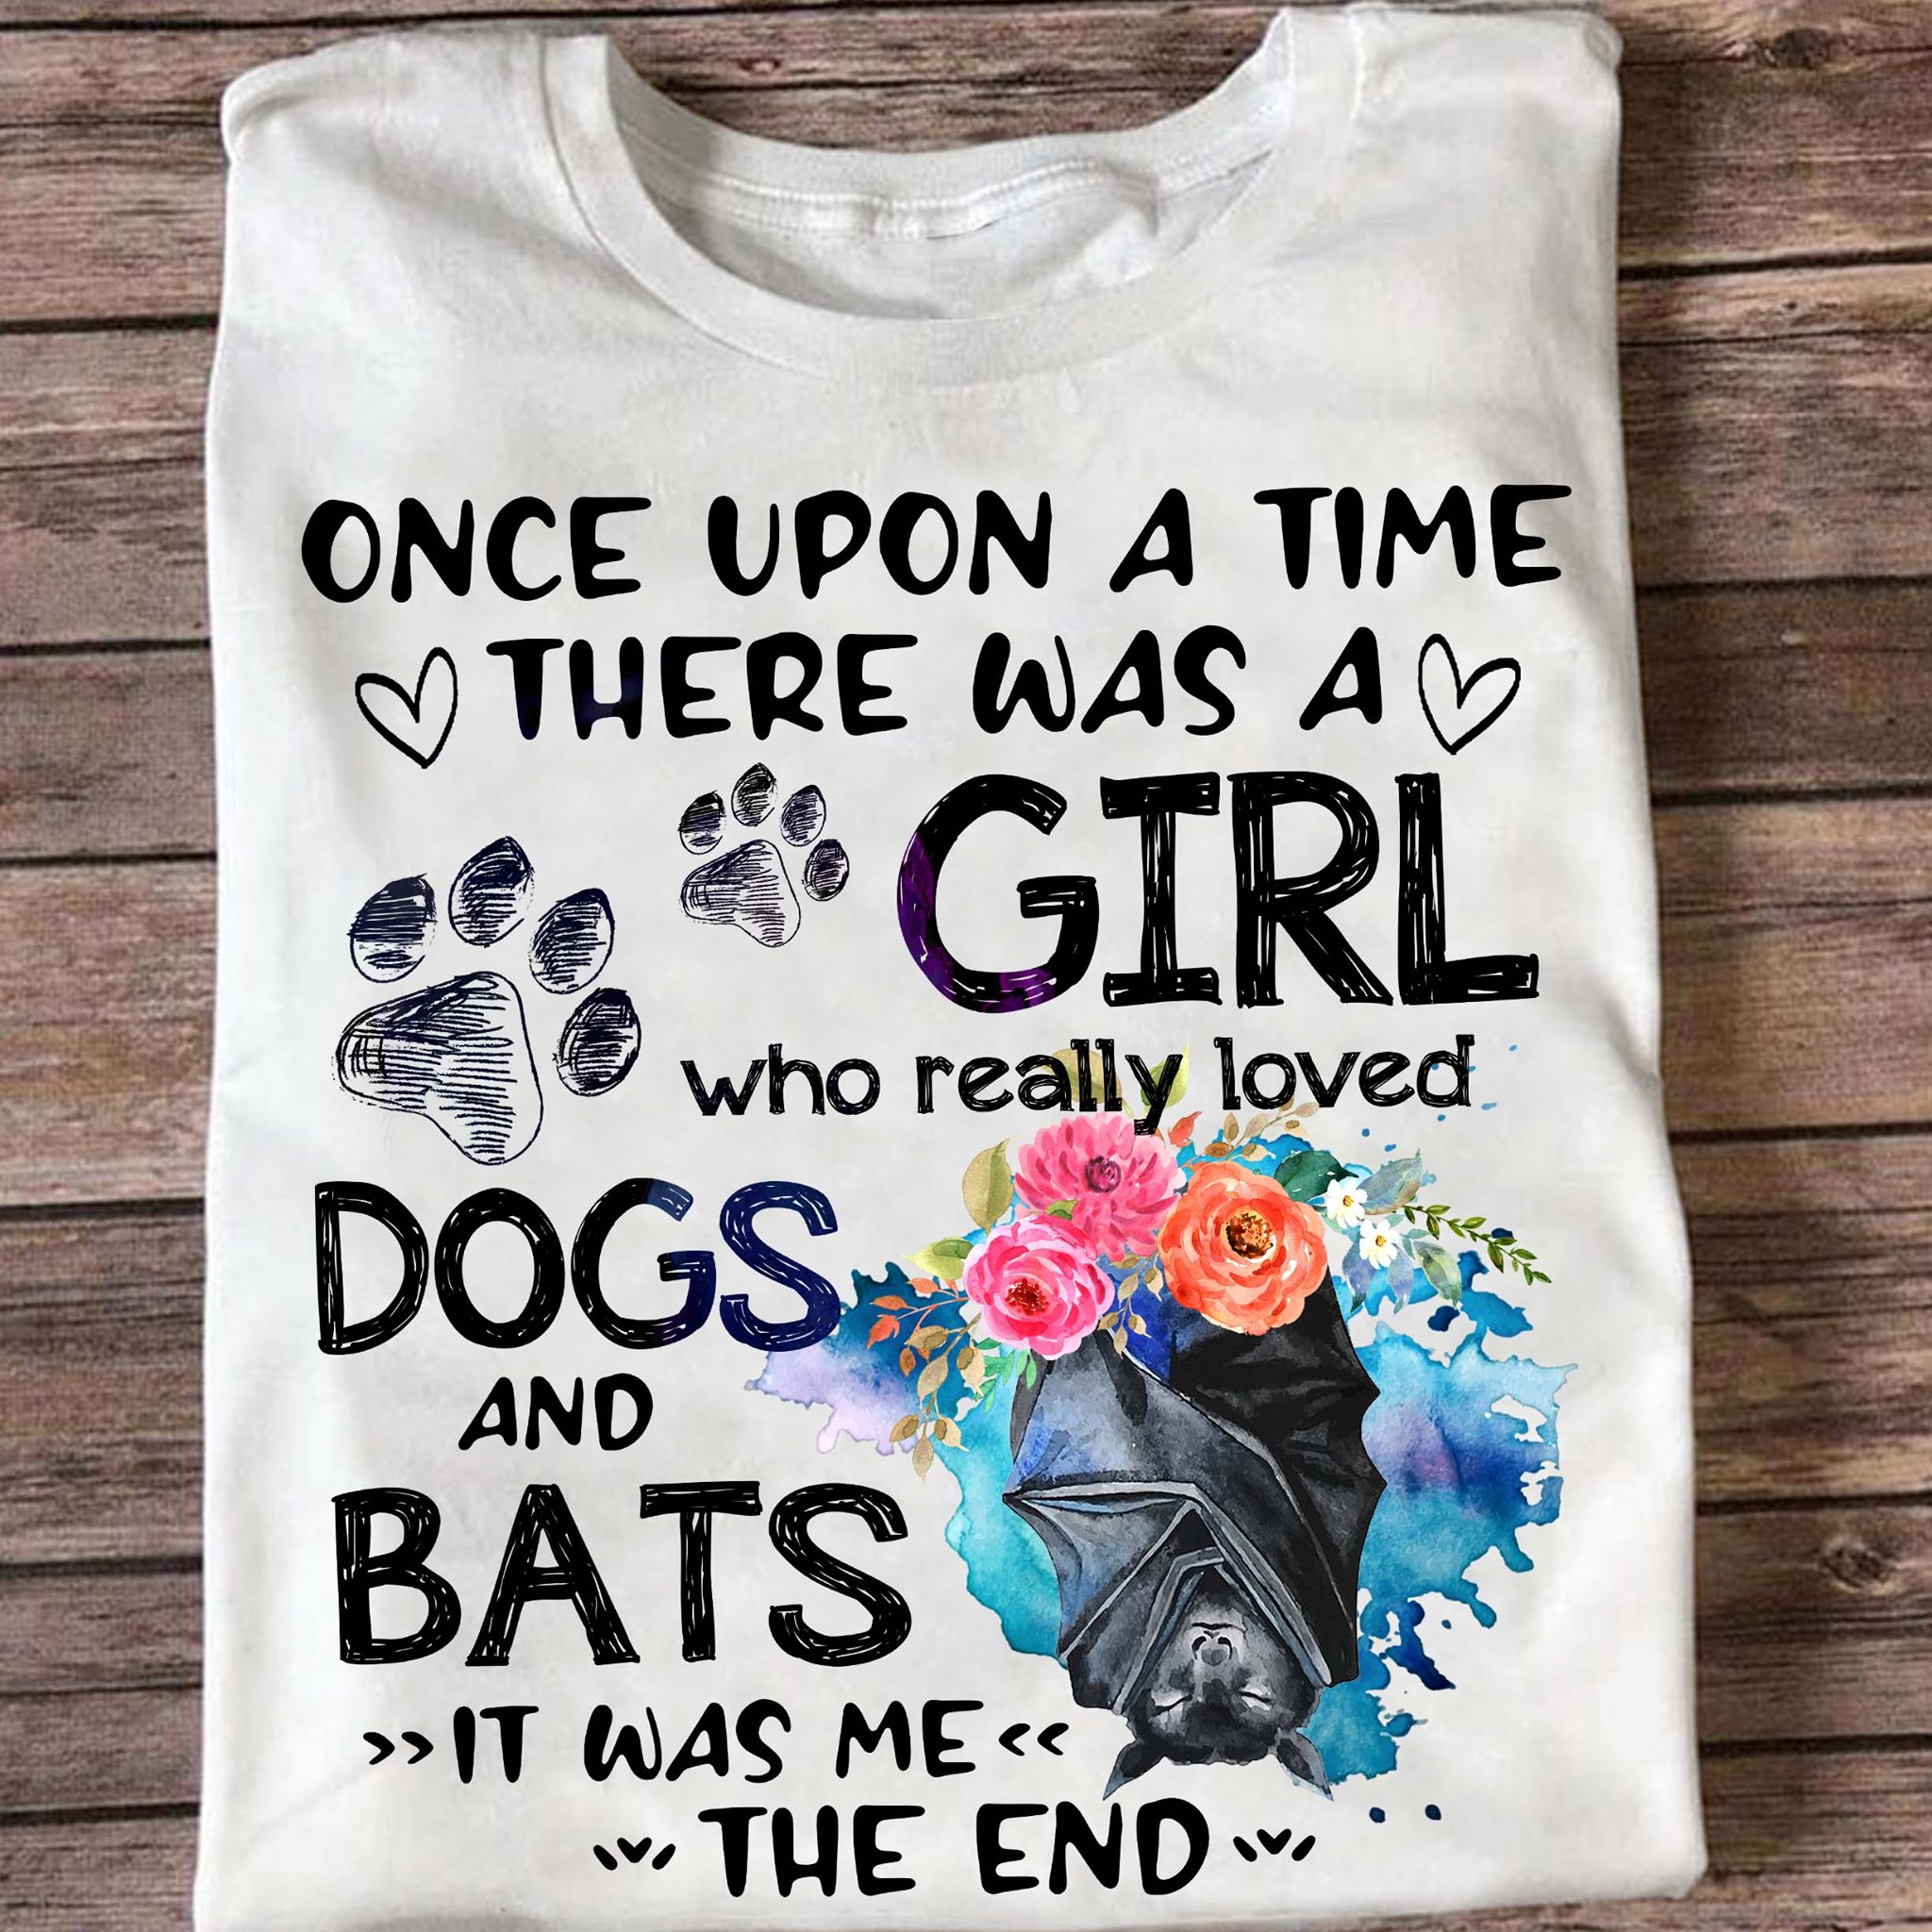 Once upon a time there was a girl who really loved dogs and bats